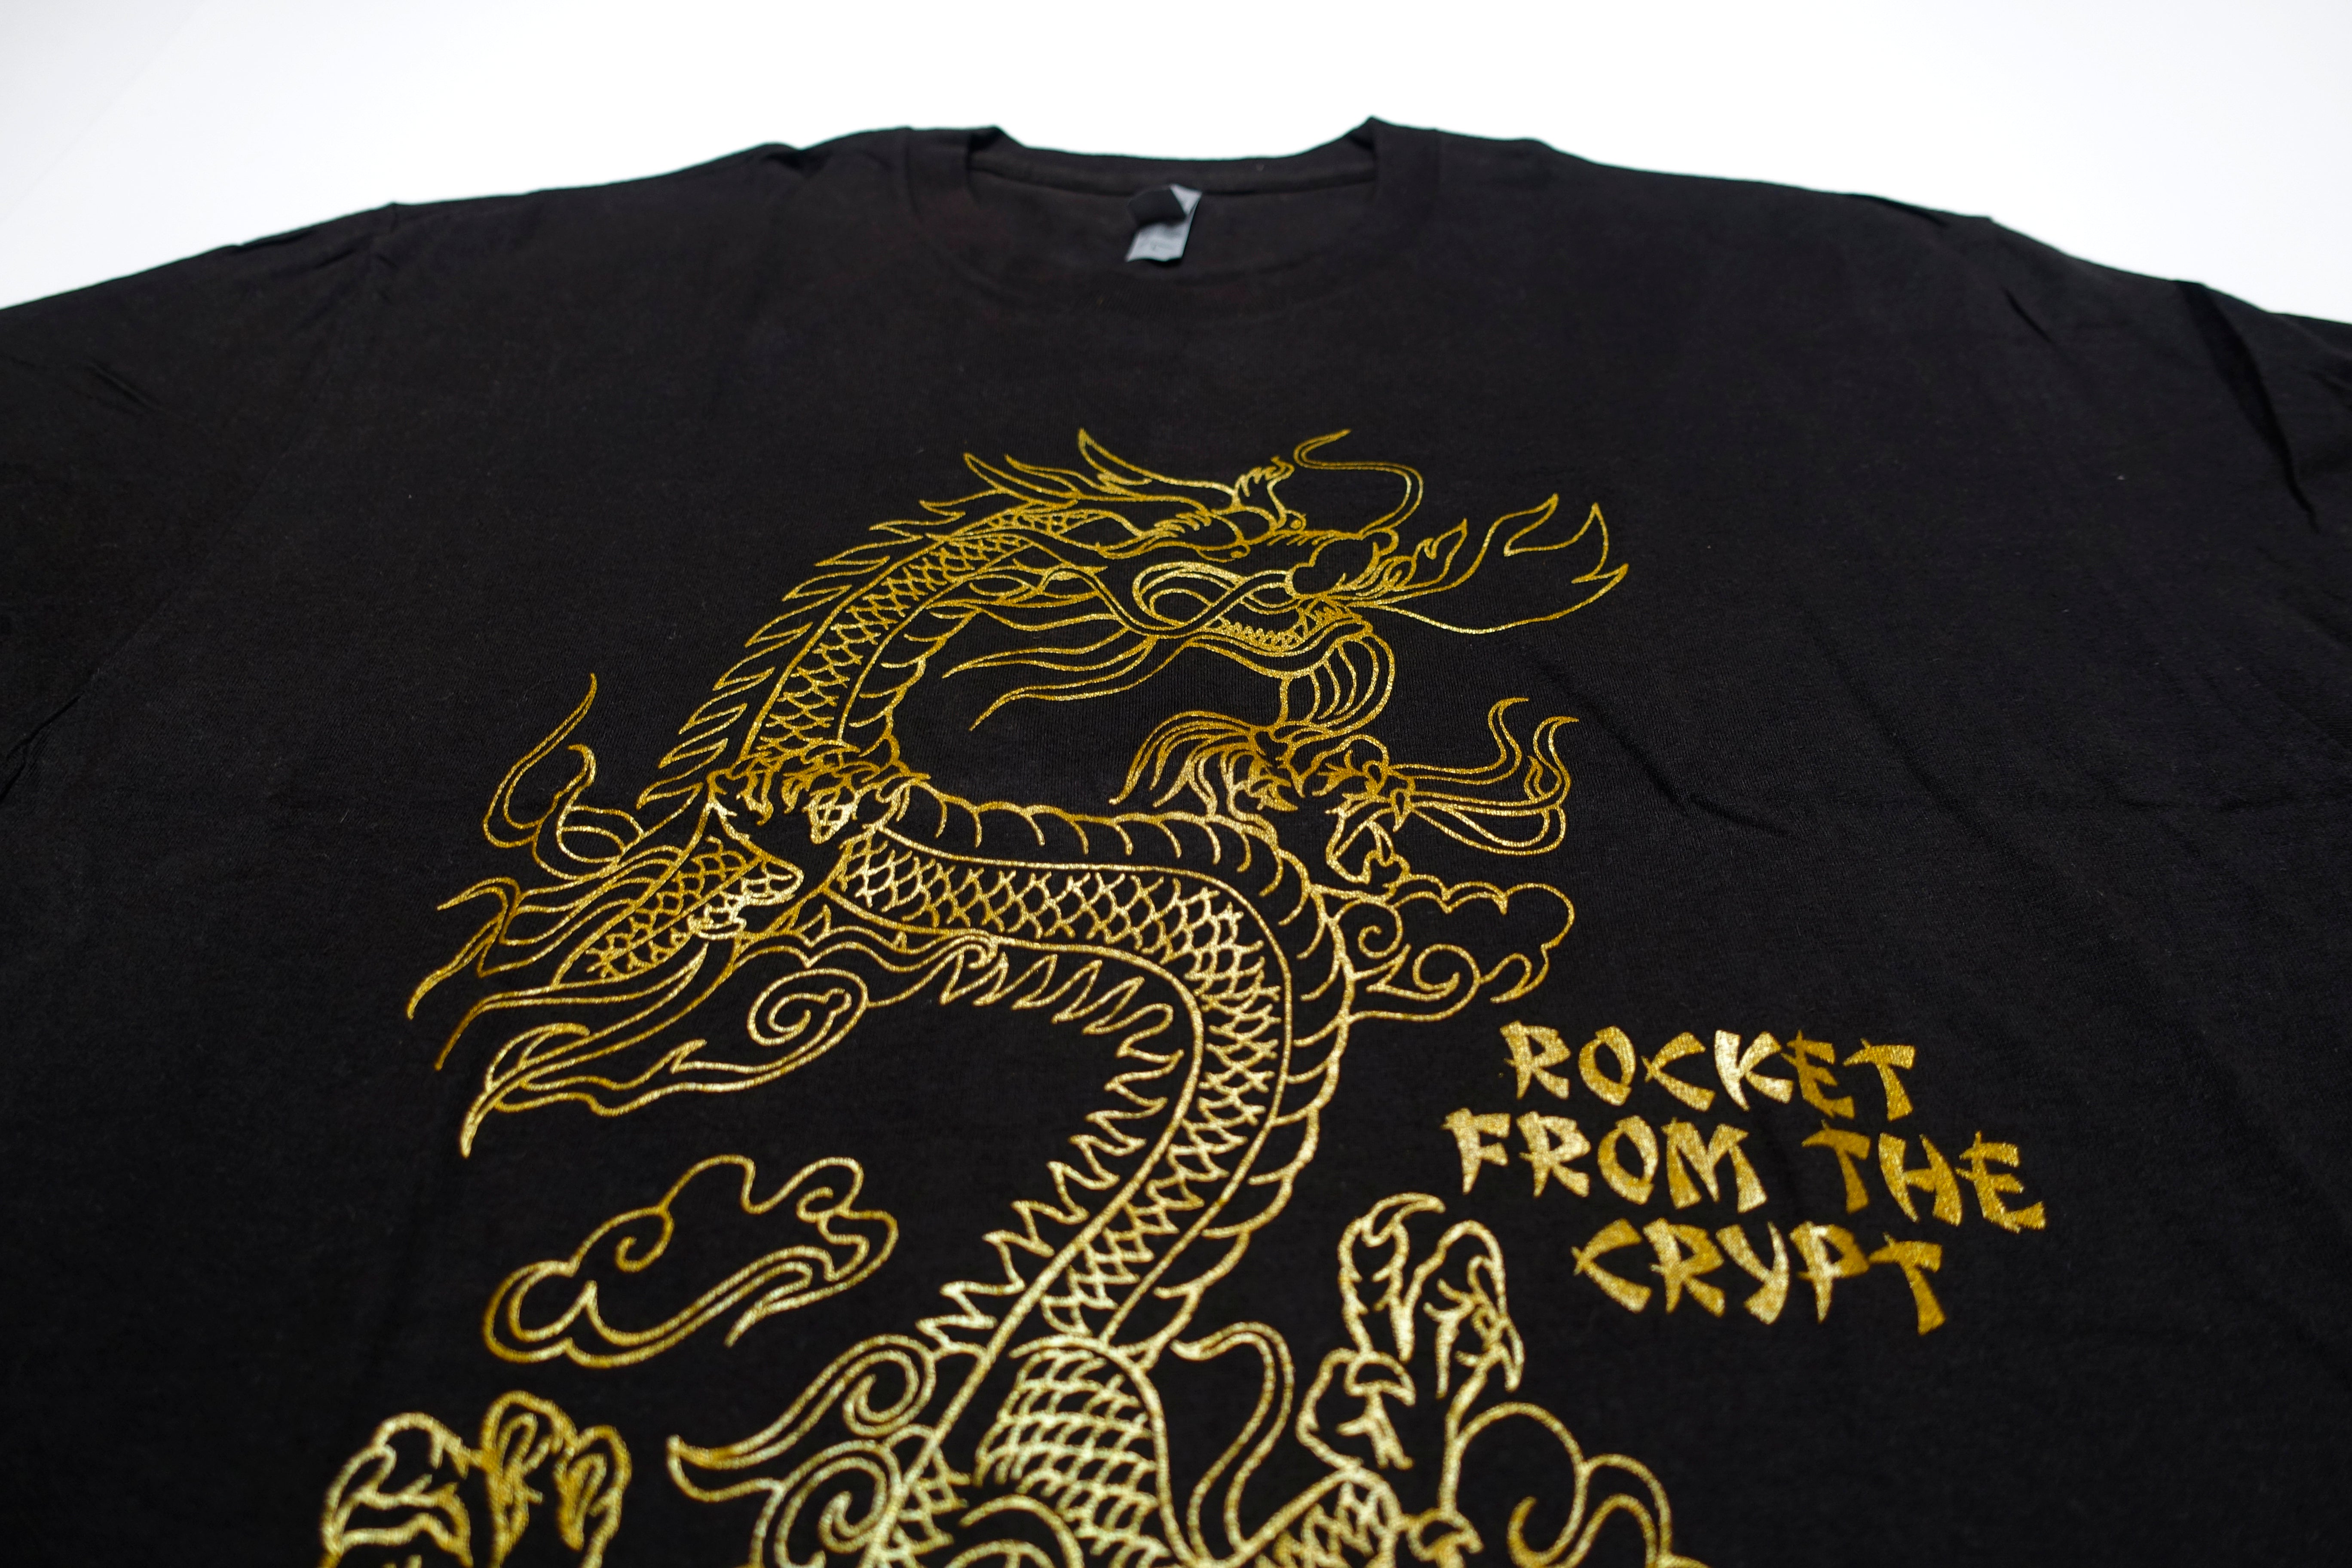 Rocket From The Crypt - 1/C Gold Dragon Tour Shirt Size Large